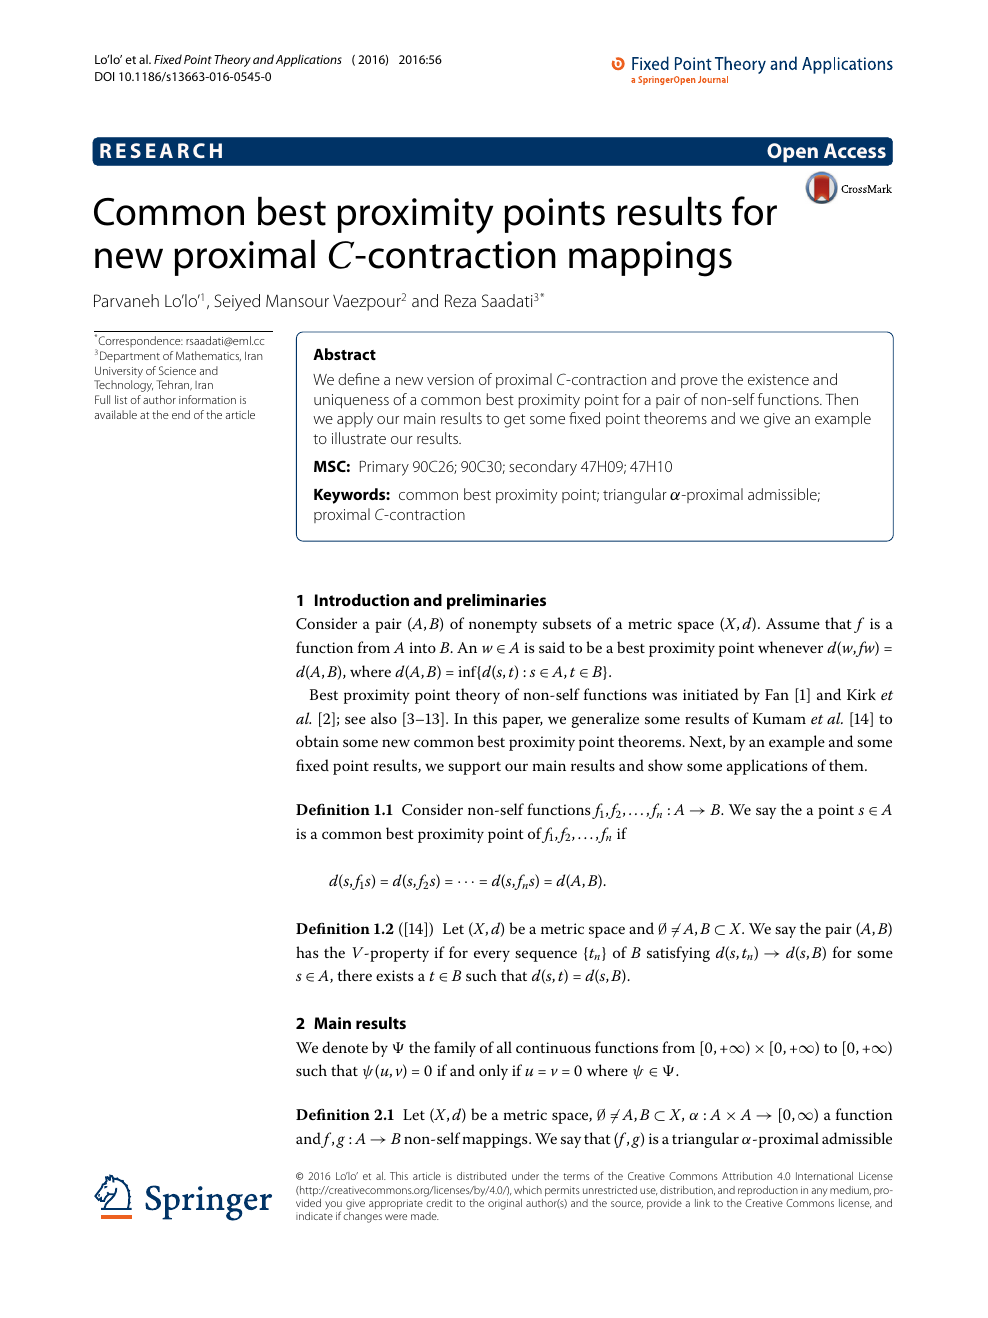 Common Best Proximity Points Results For New Proximal C Contraction Mappings Topic Of Research Paper In Mathematics Download Scholarly Article Pdf And Read For Free On Cyberleninka Open Science Hub